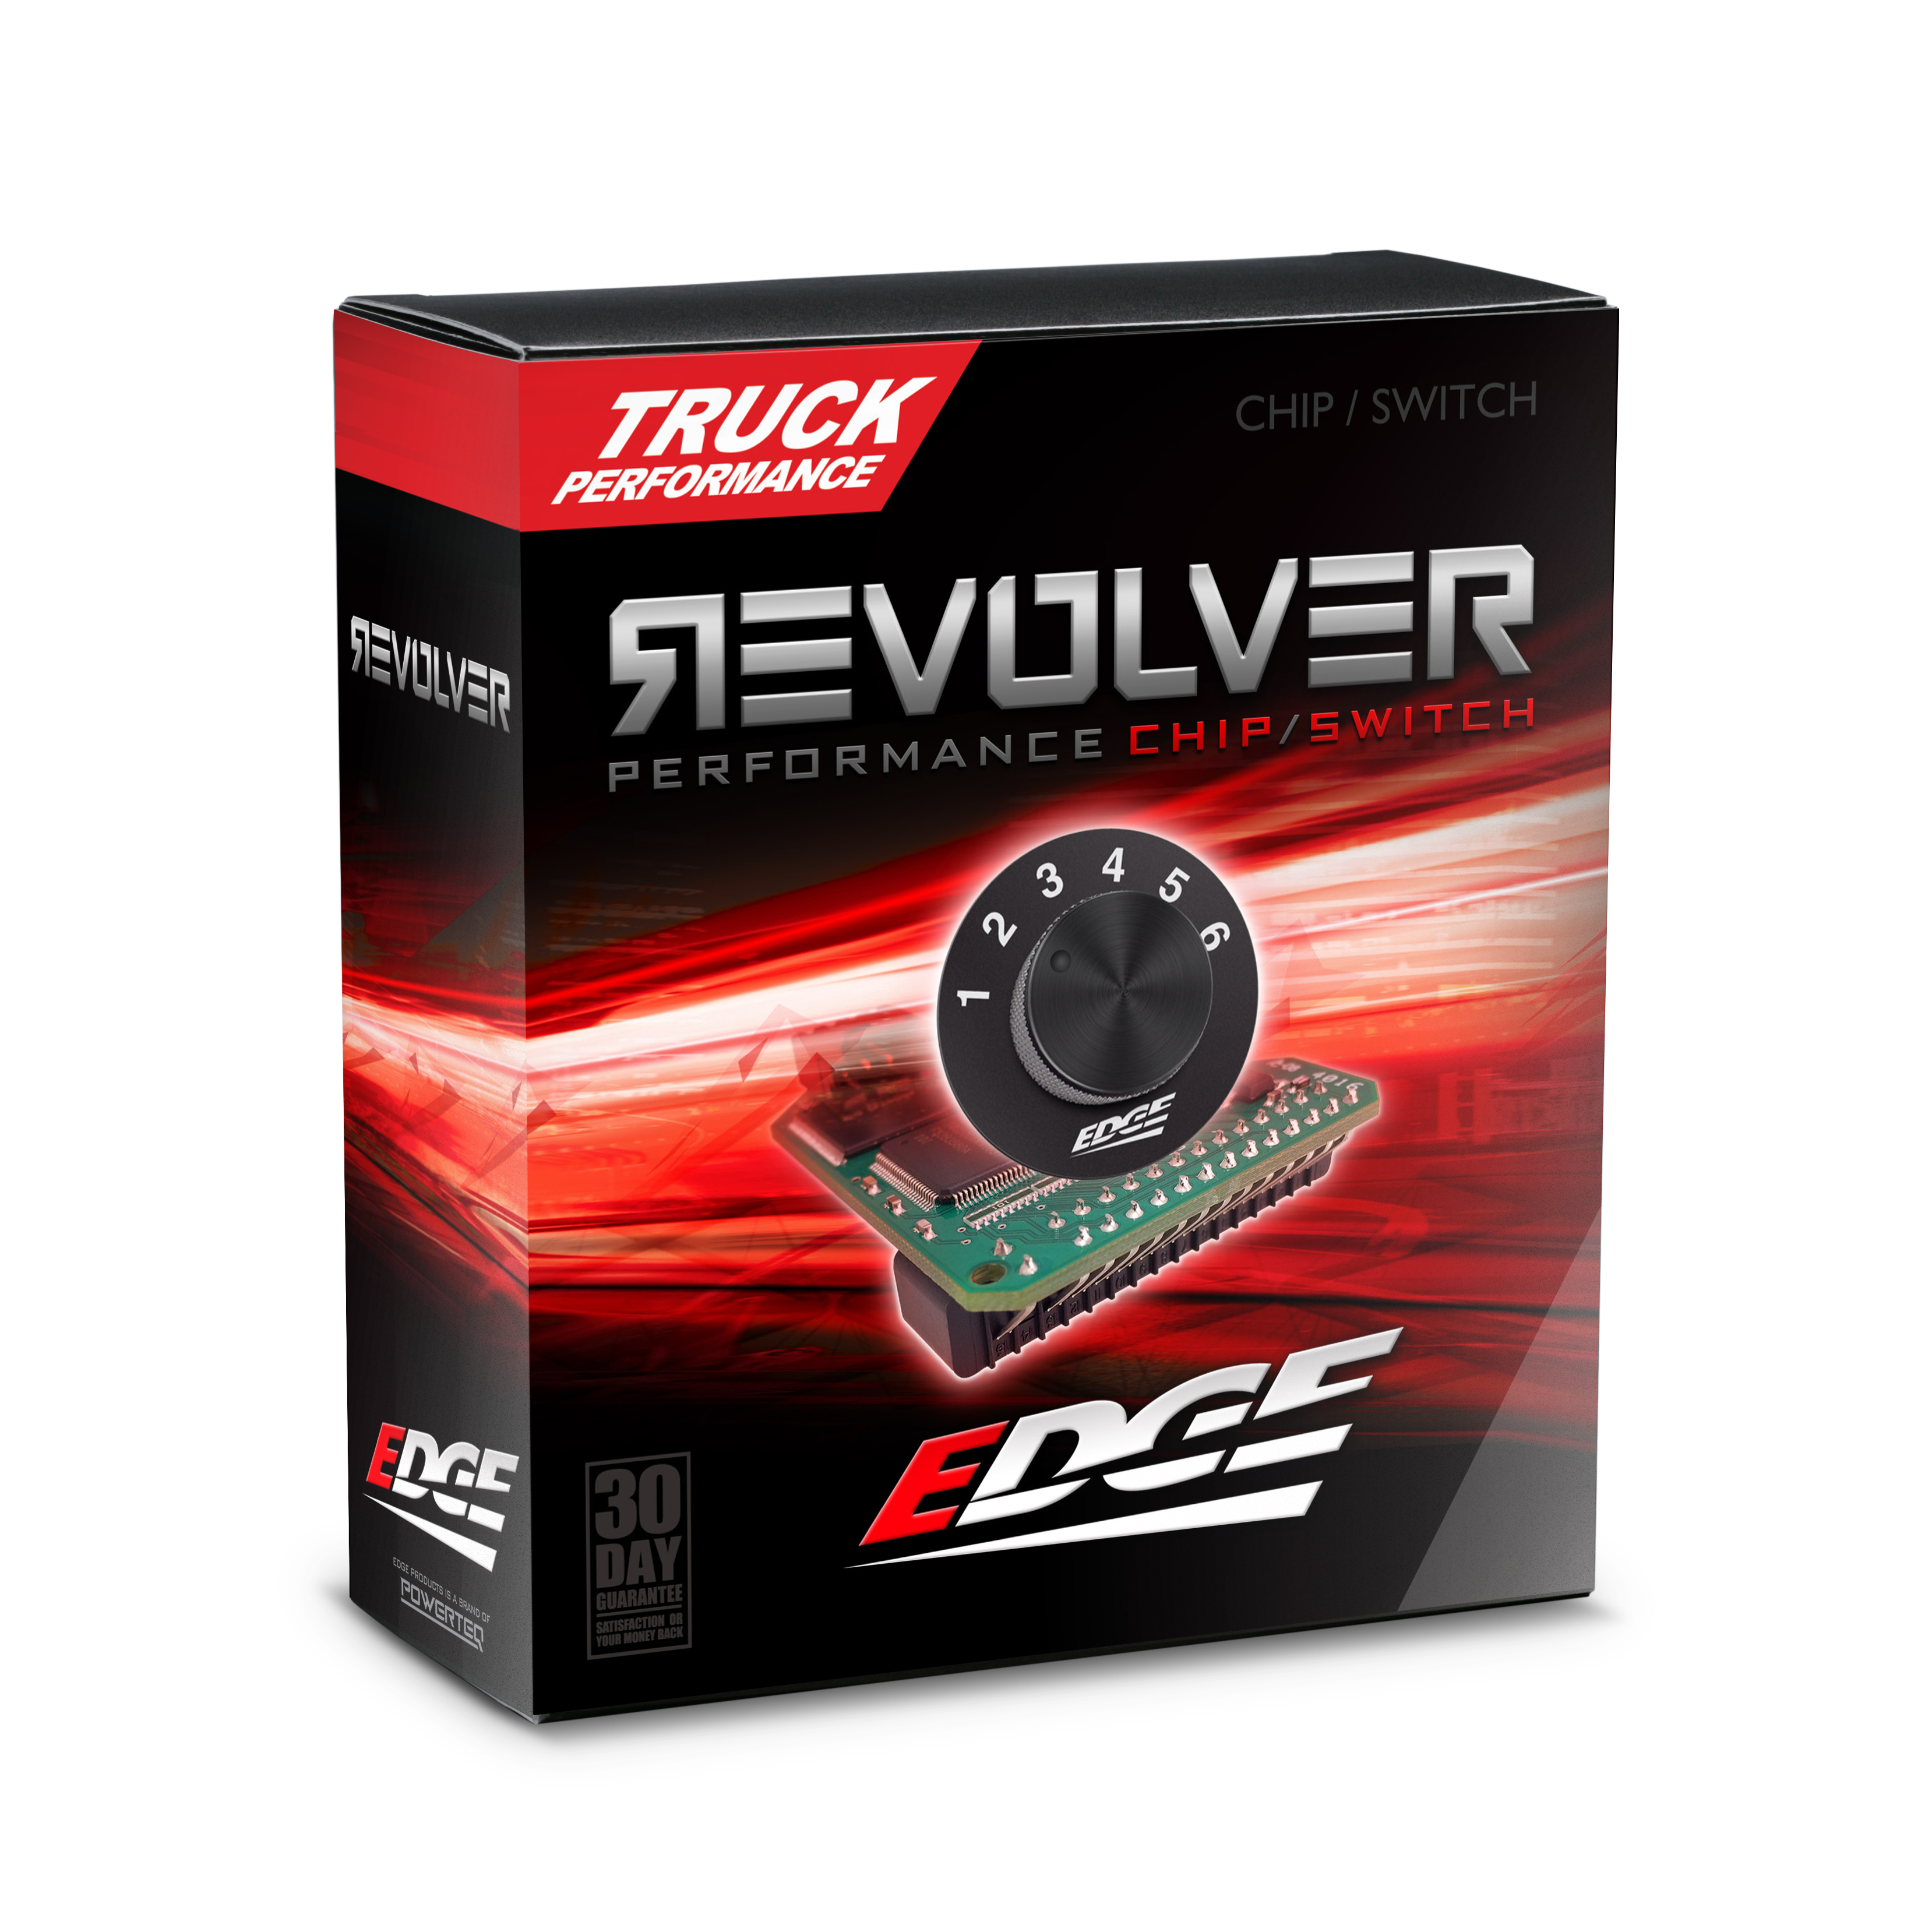 REVOLVER PERFORMANCE CHIP/SWITCH FORD 7.3L 02-03 Manual 6- Chip Master Box Code AEB3